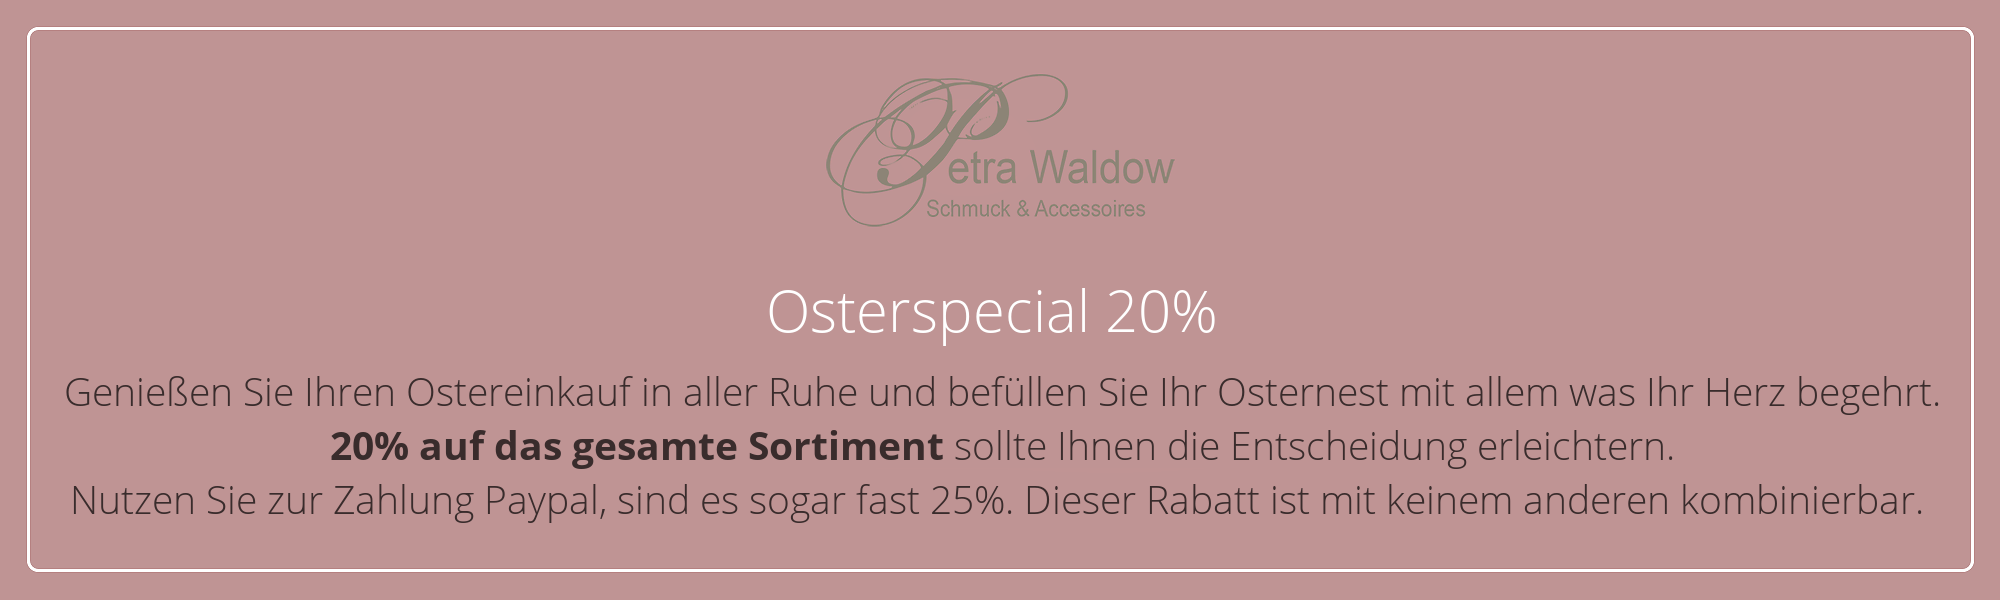 20% Osterspecial